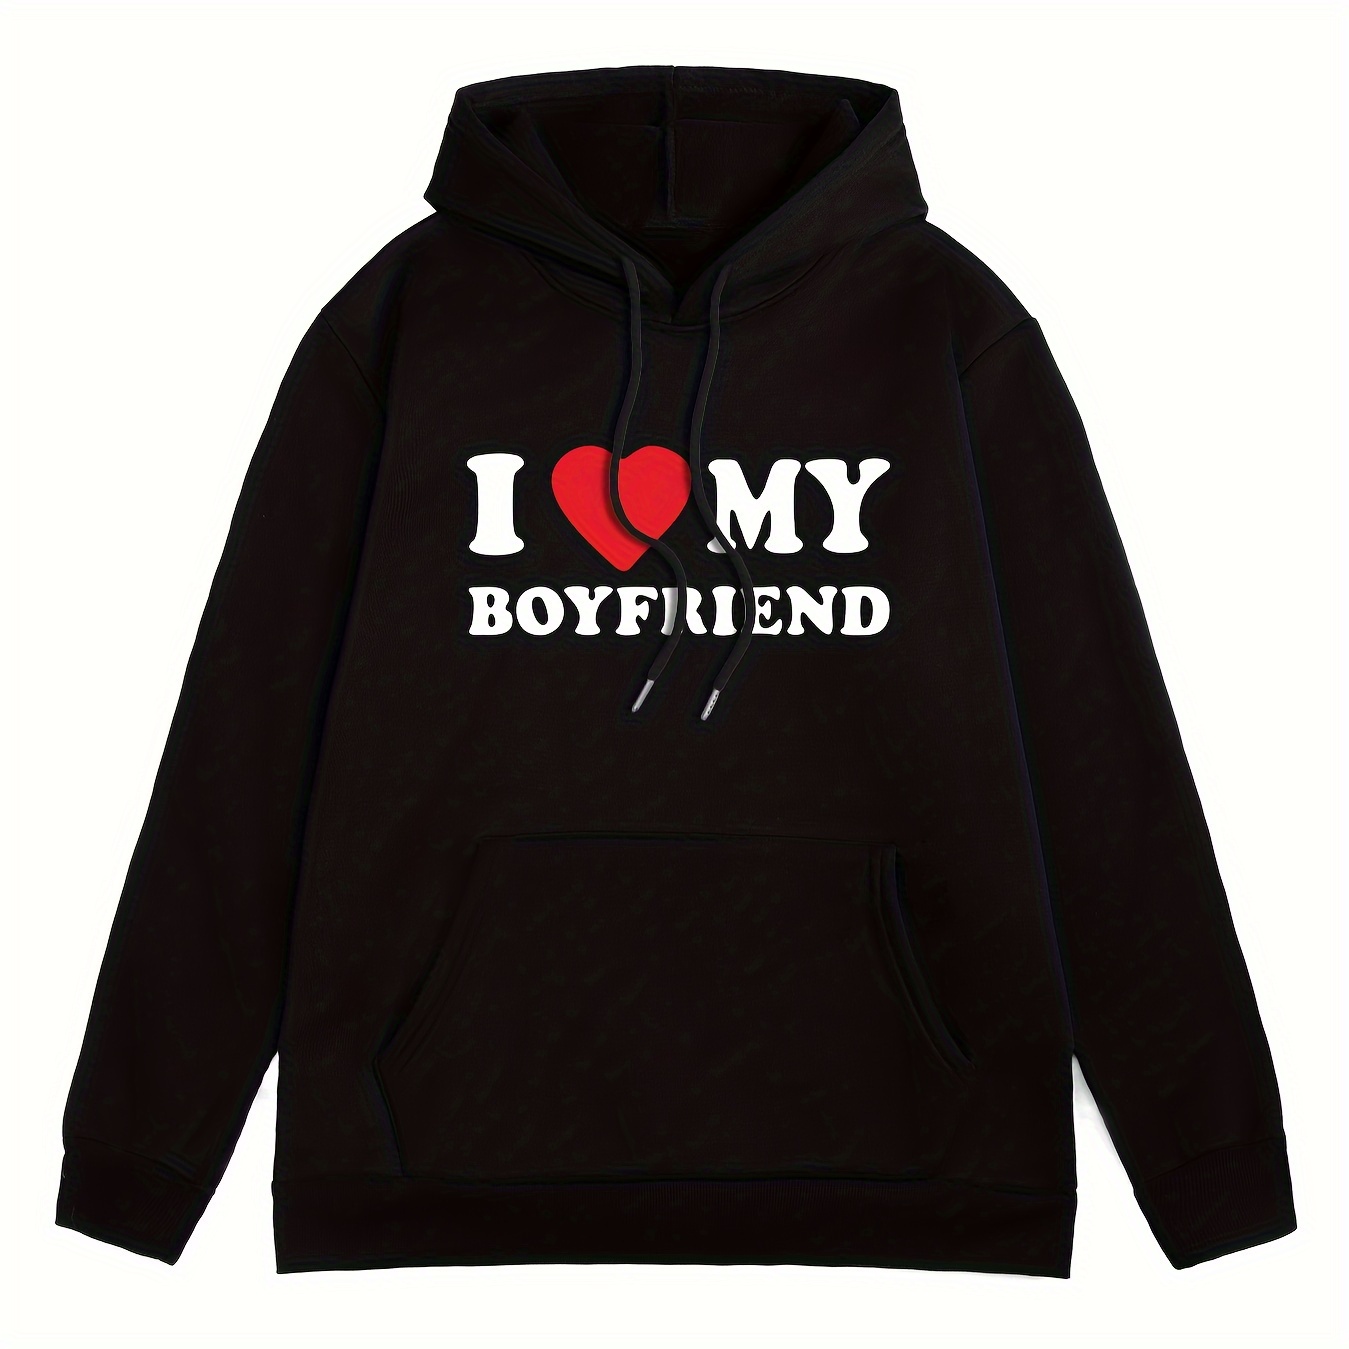 

I Love My Boyfriend Print Hoodie, Cool Sweatshirt For Men, Men's Casual Hooded Pullover Streetwear Clothing For Spring Fall Winter, As Gifts